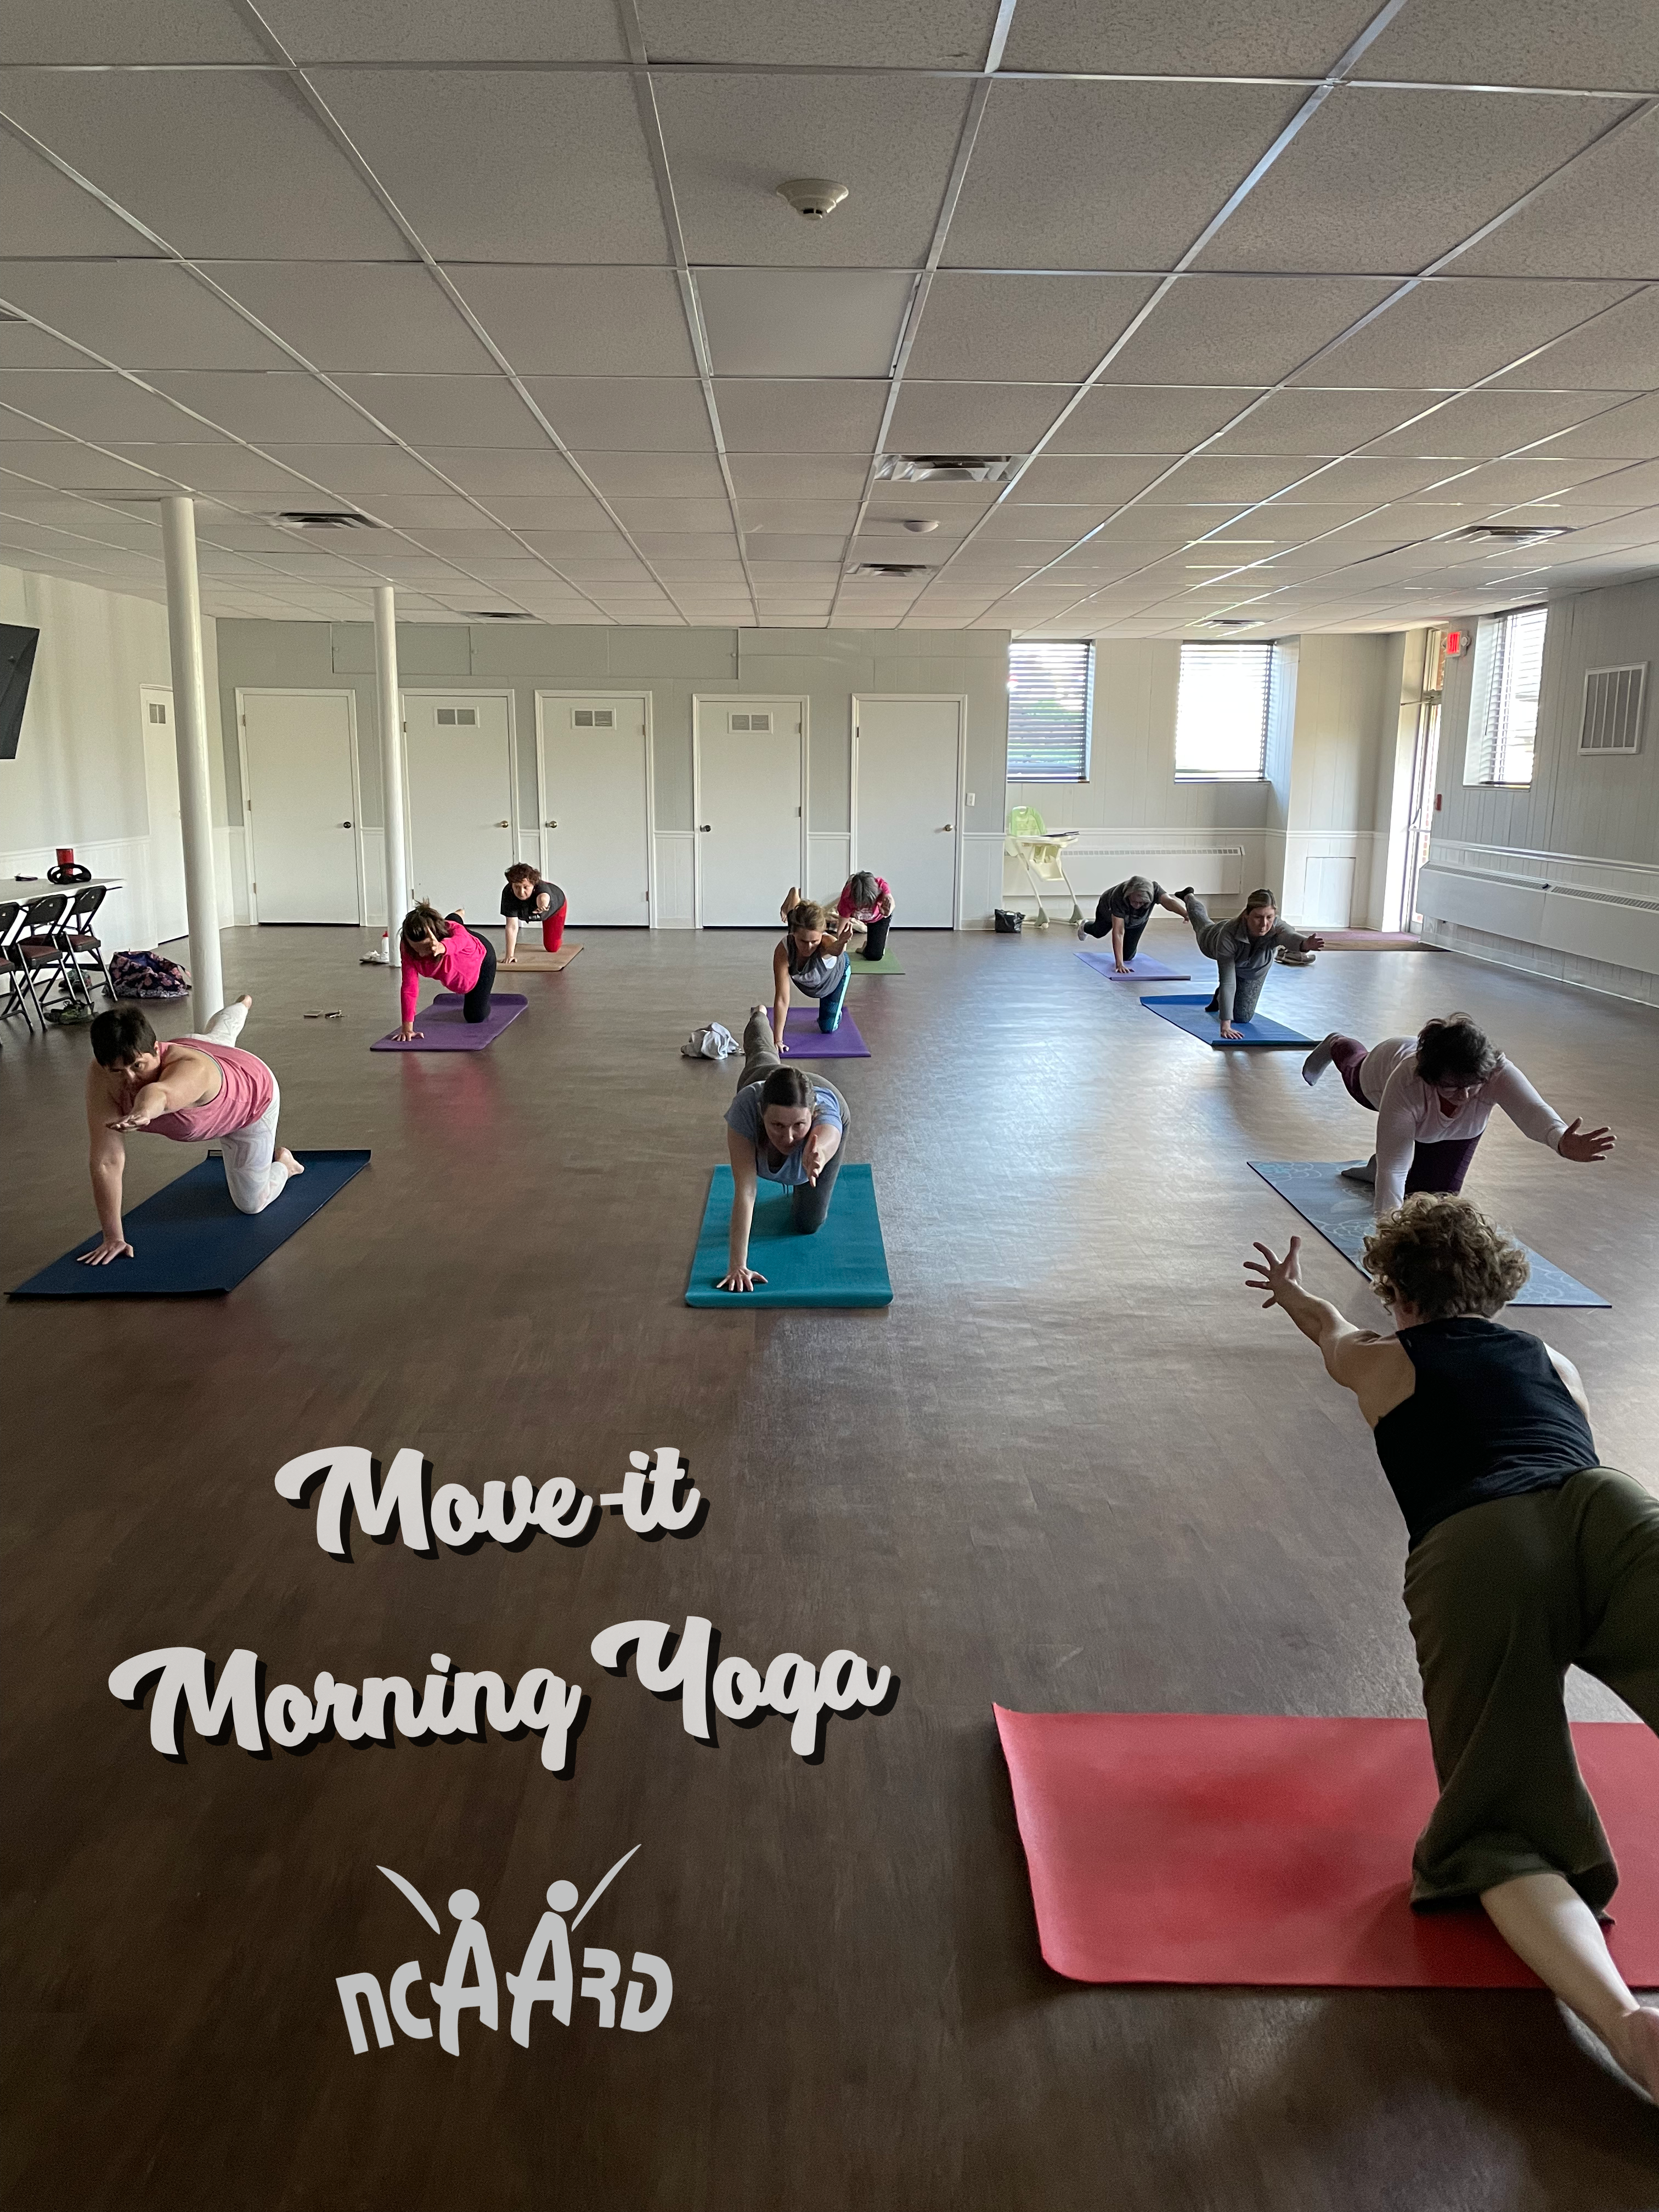 A yoga class with the text 'Move-It Morning Yoga'.